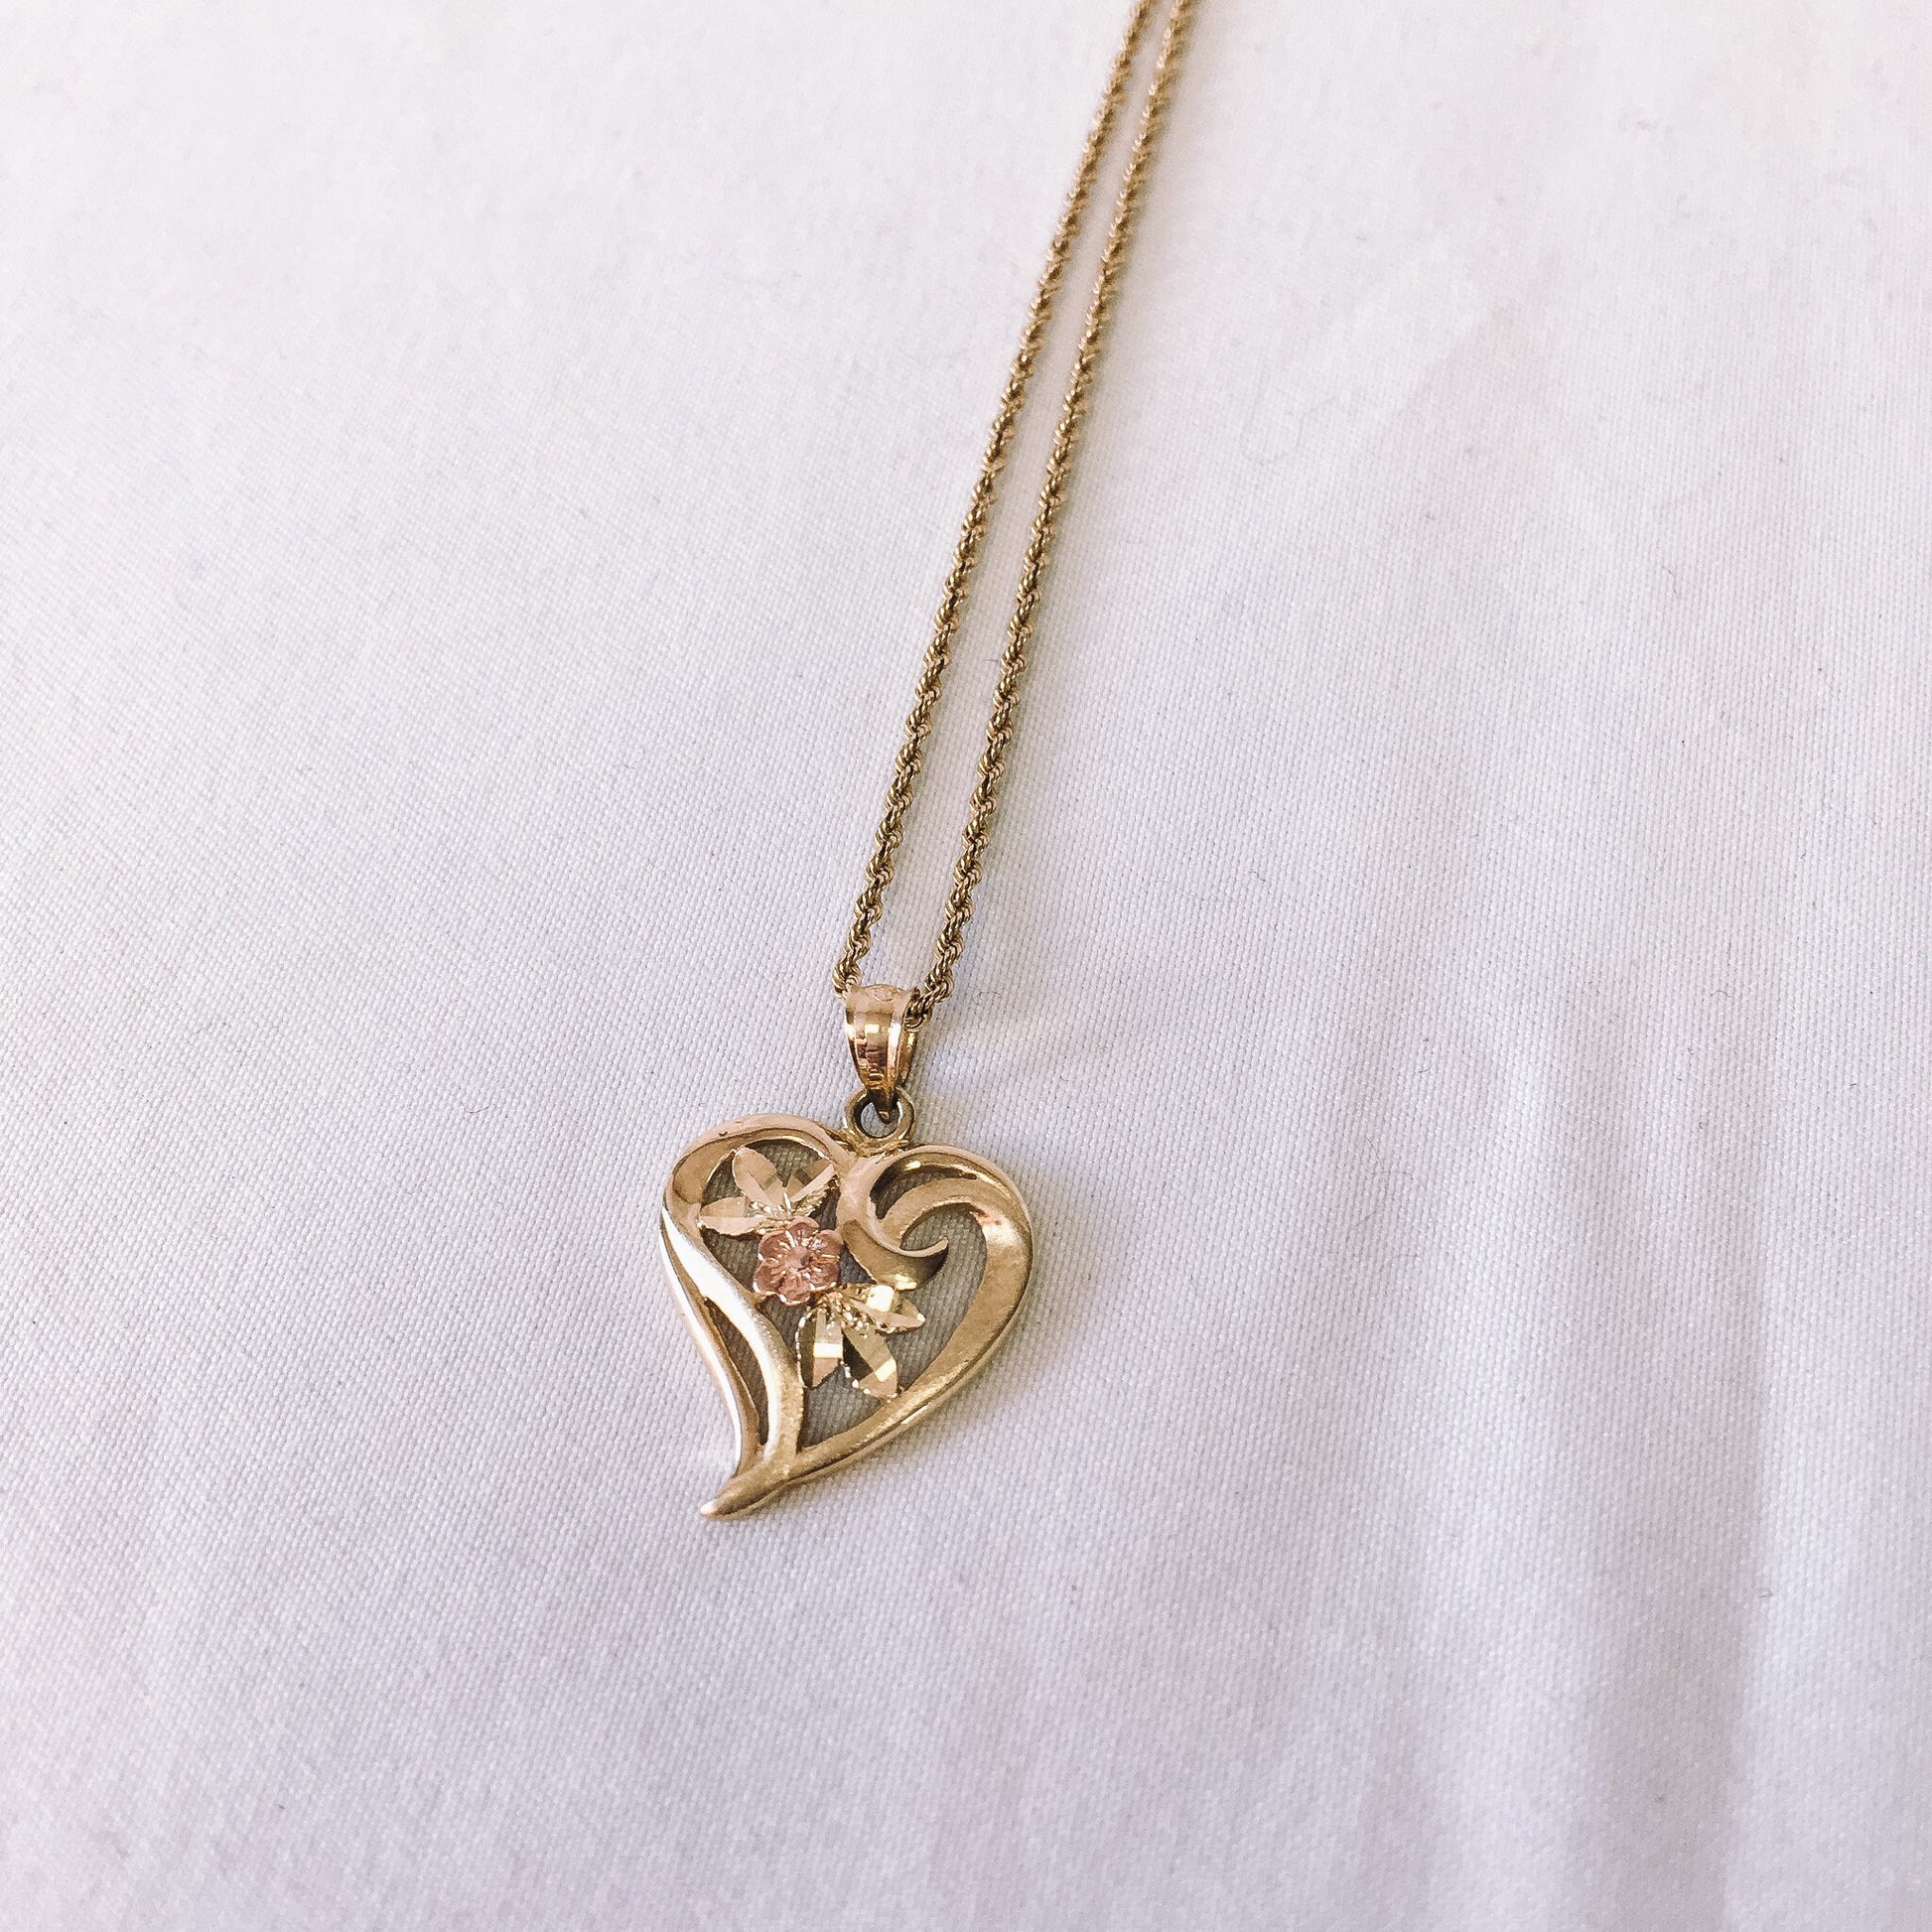 Vintage OR America 14k Gold Heart Pendant on Replacement 14k Gold Chain